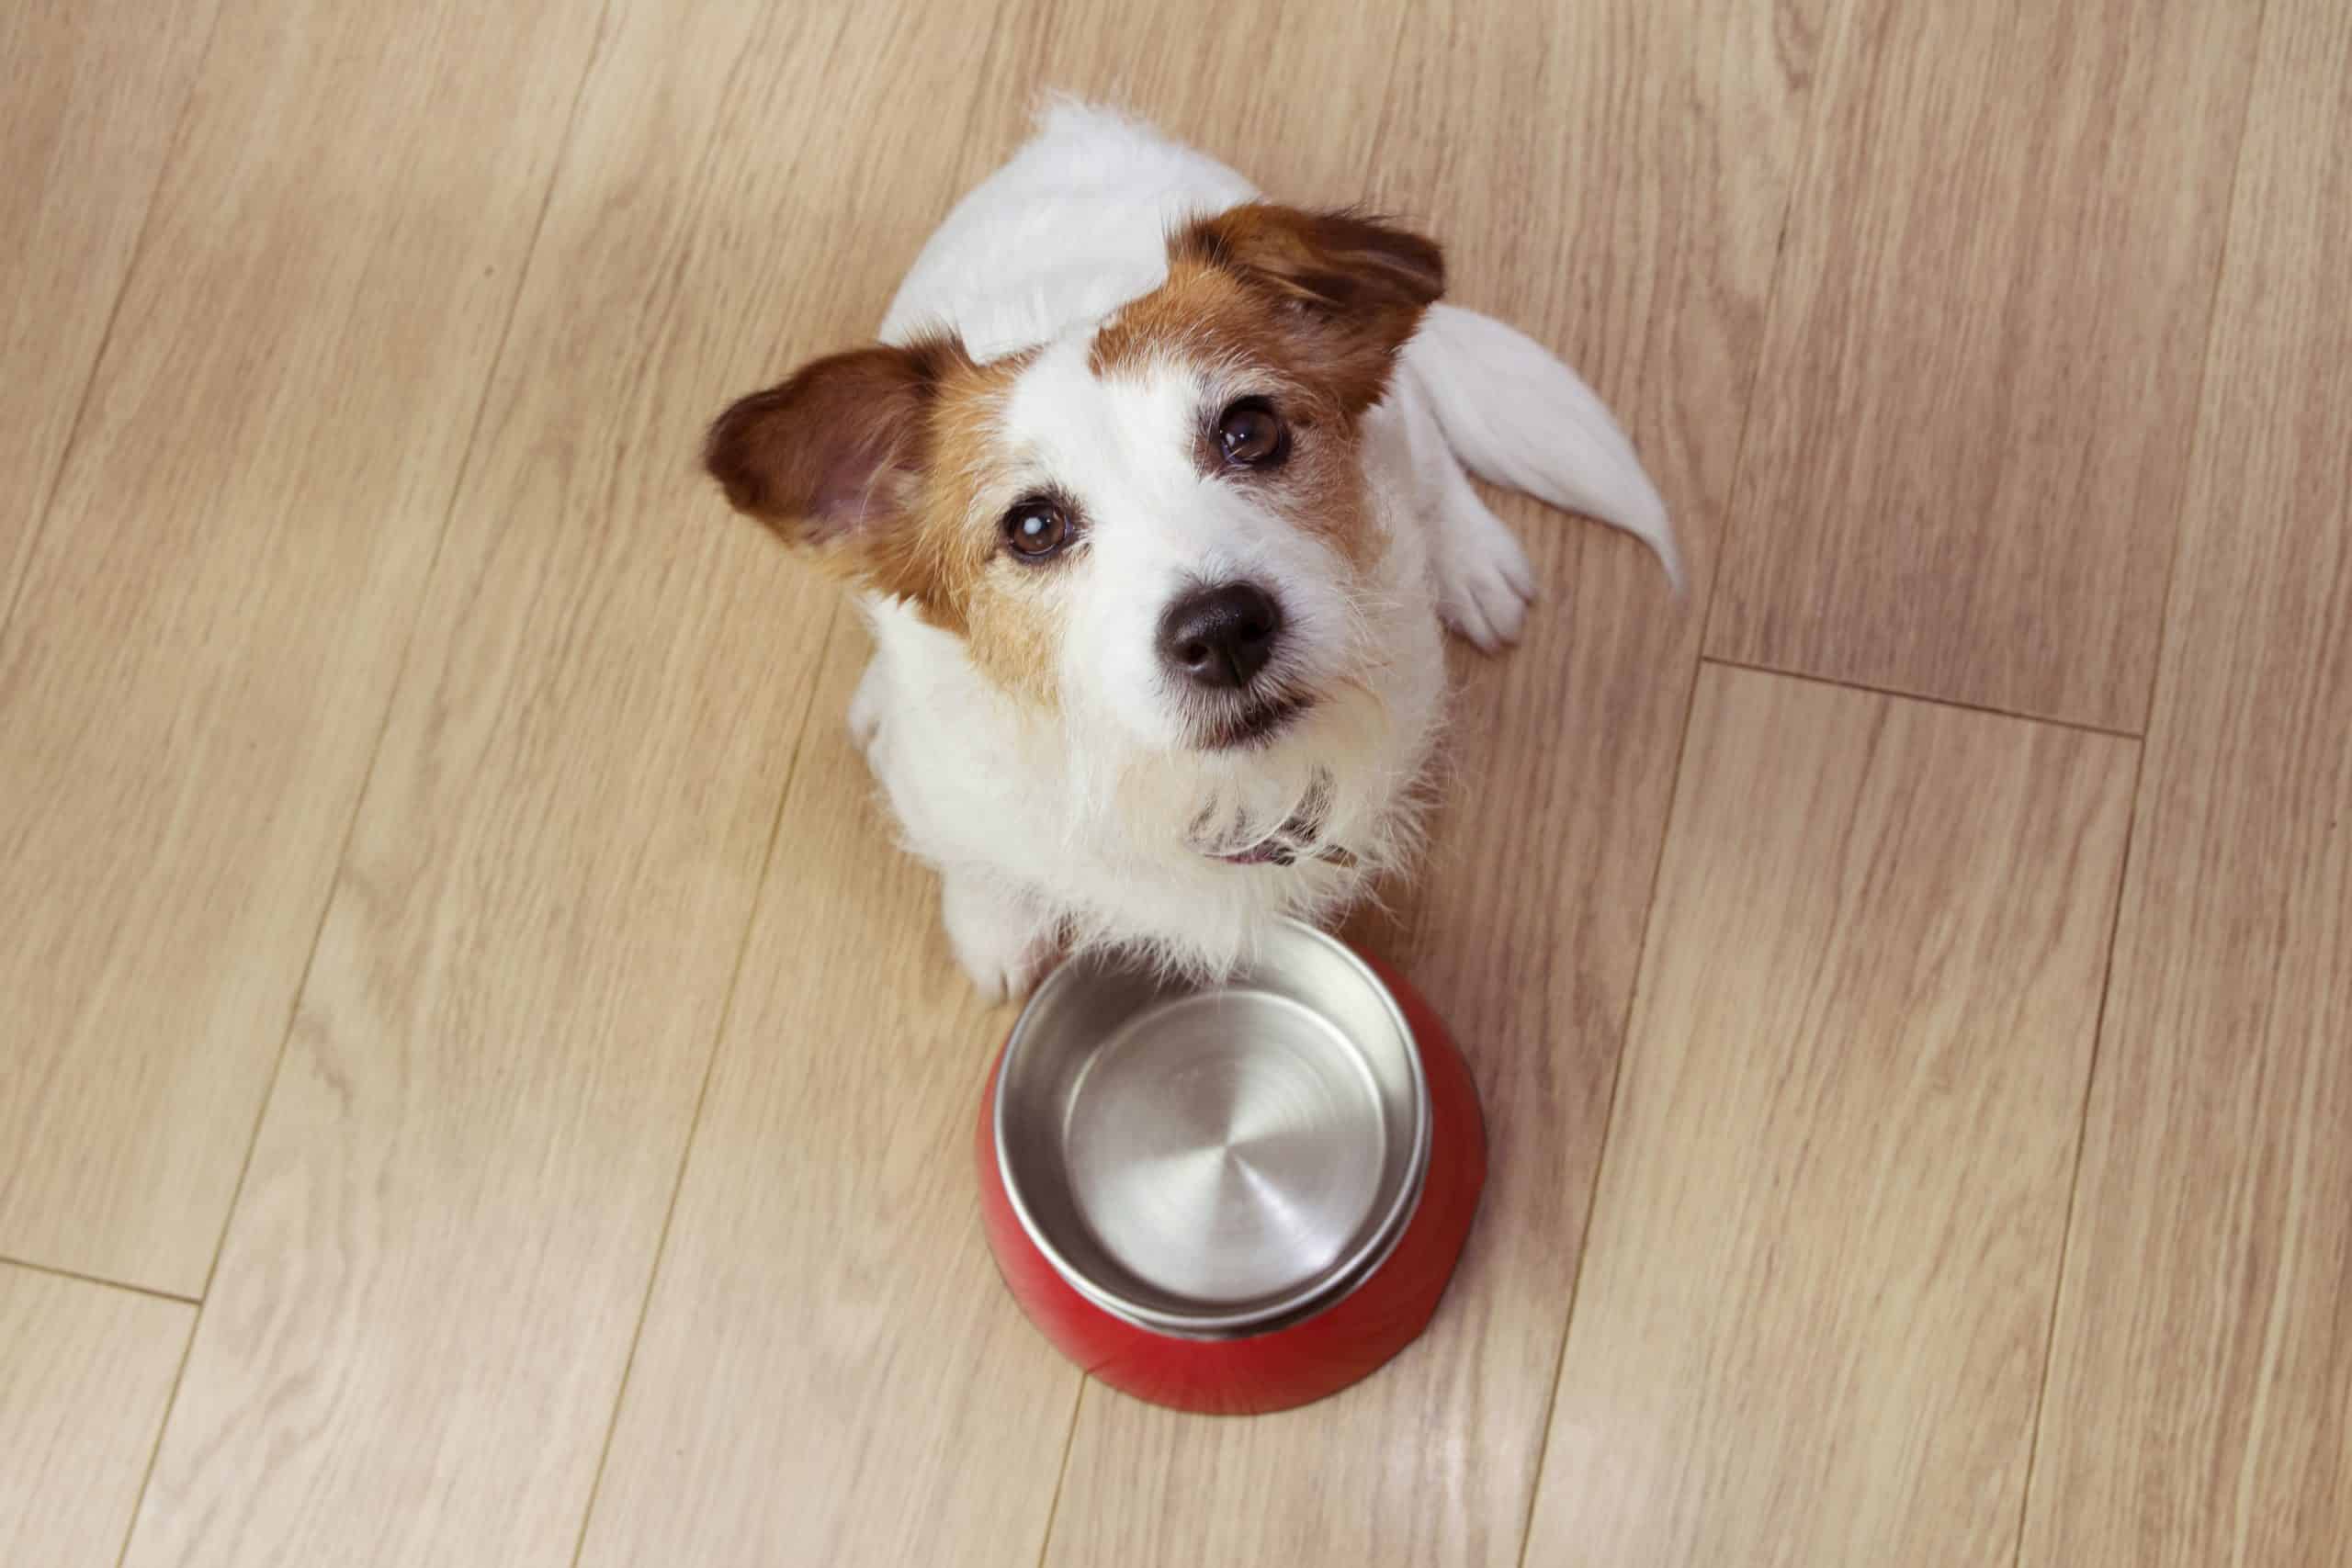 Jack Russell terrier sits with empty food bowl. To get the best supplements for dogs, do your research before making a purchase. Supplements to consider include glucosamine and antioxidants.